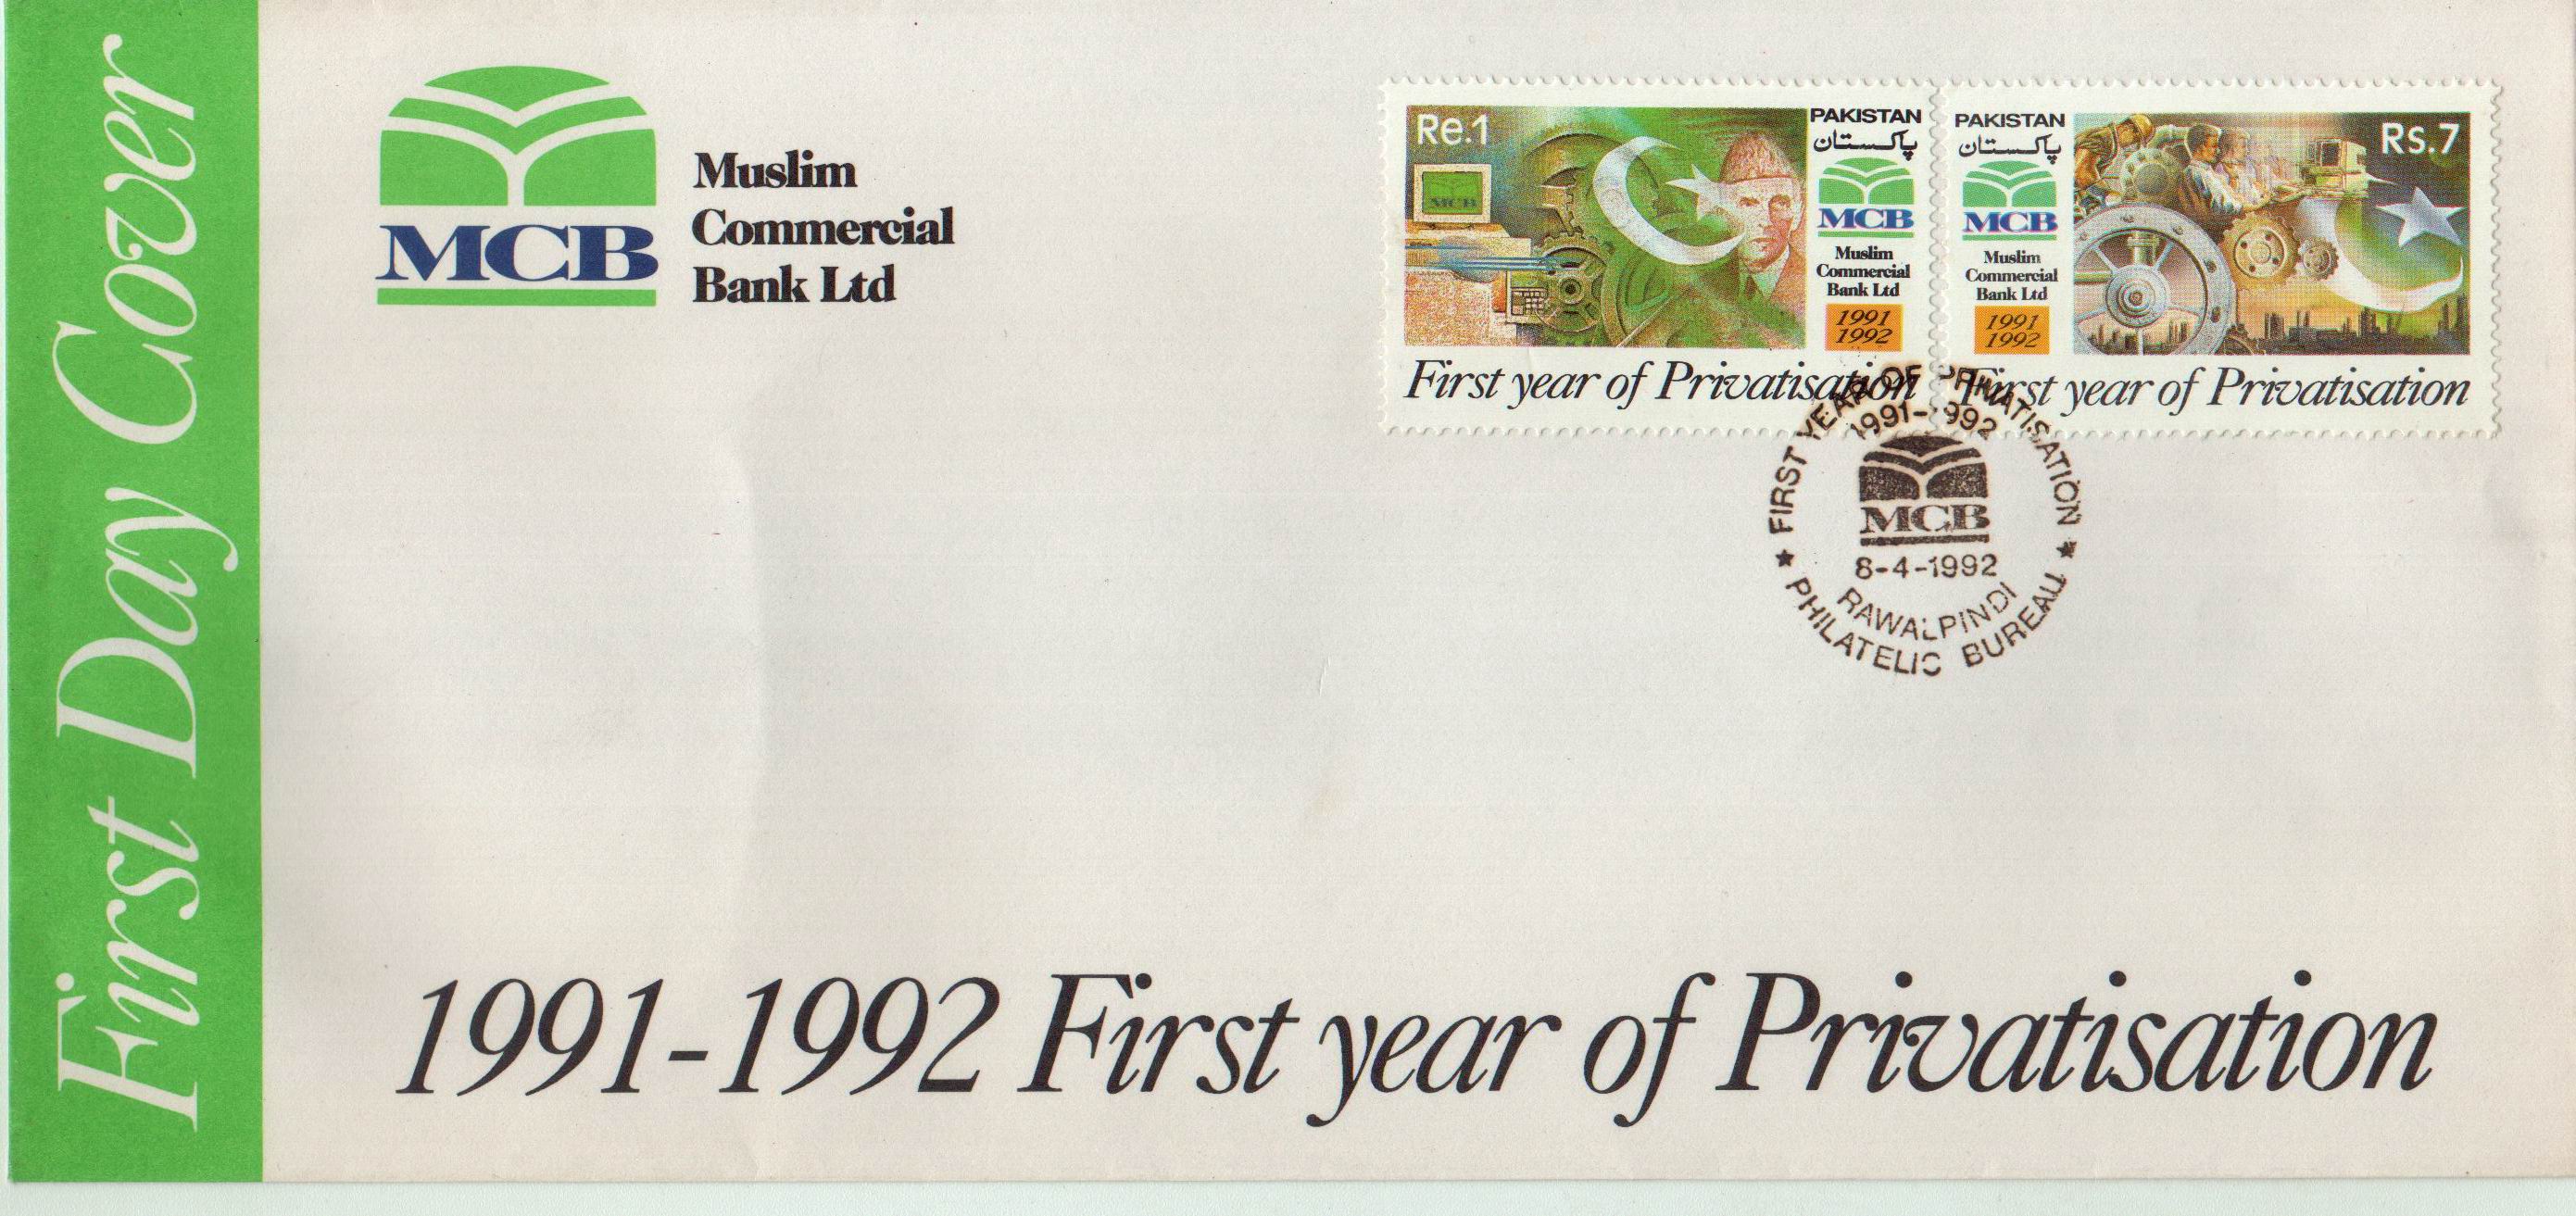 Pakistan Fdc 1992 Brochure & Stamps Muslim Commercial Bank Ltd - Click Image to Close